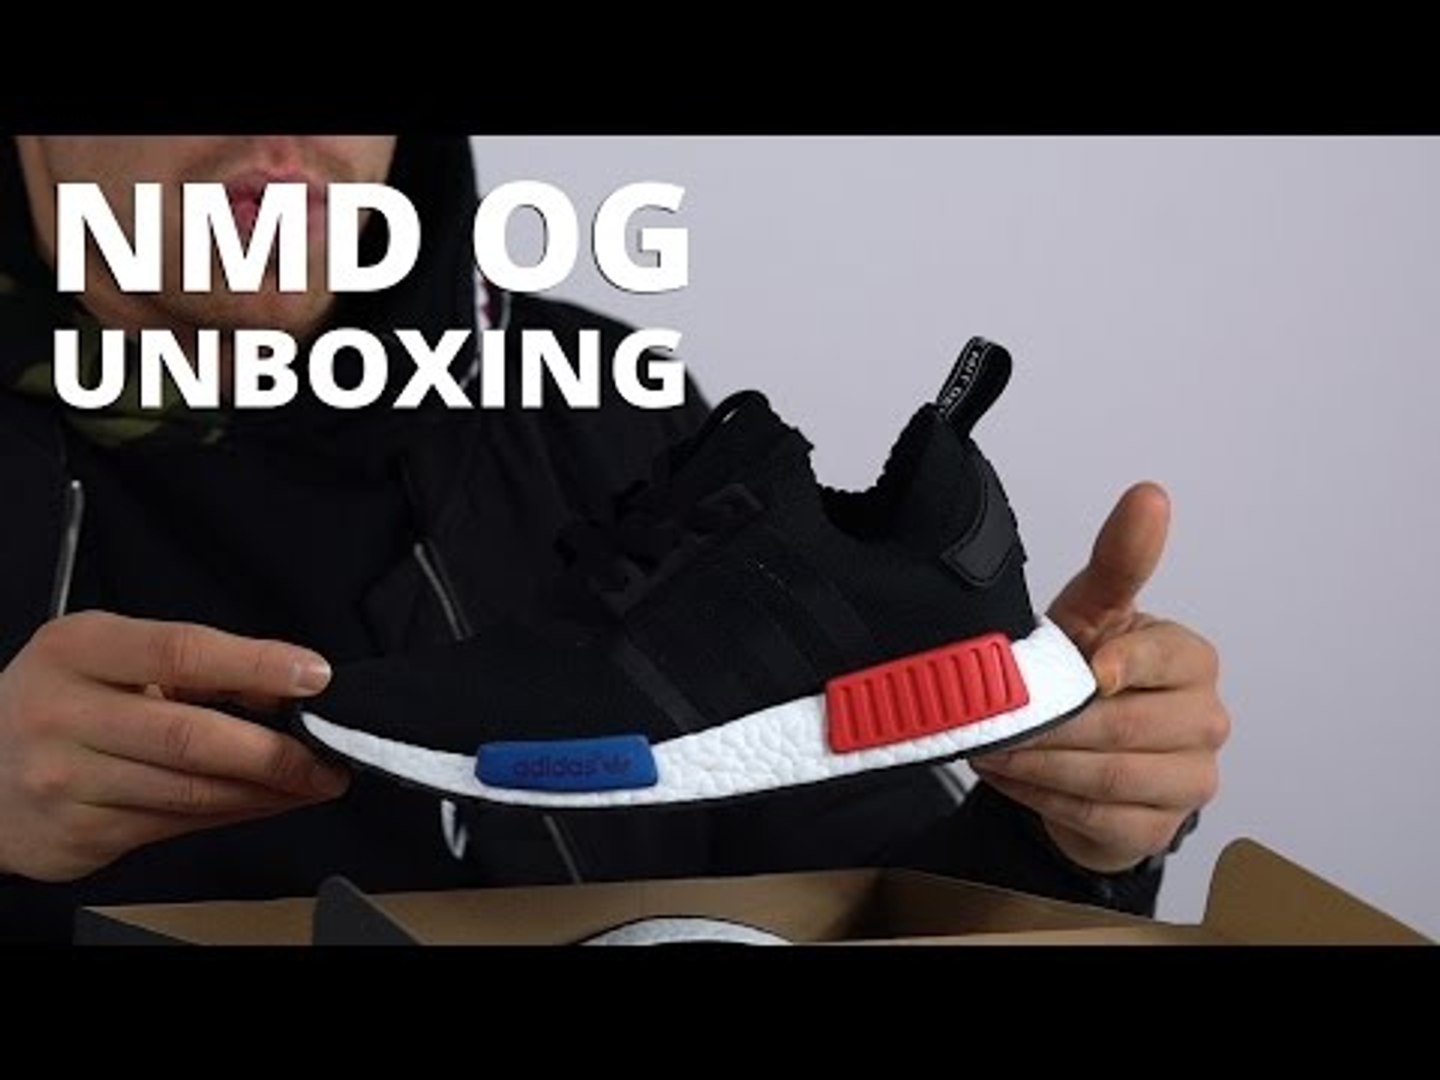 adidas NMD R1 OG Unboxing | ITS STILL FIRE - video Dailymotion